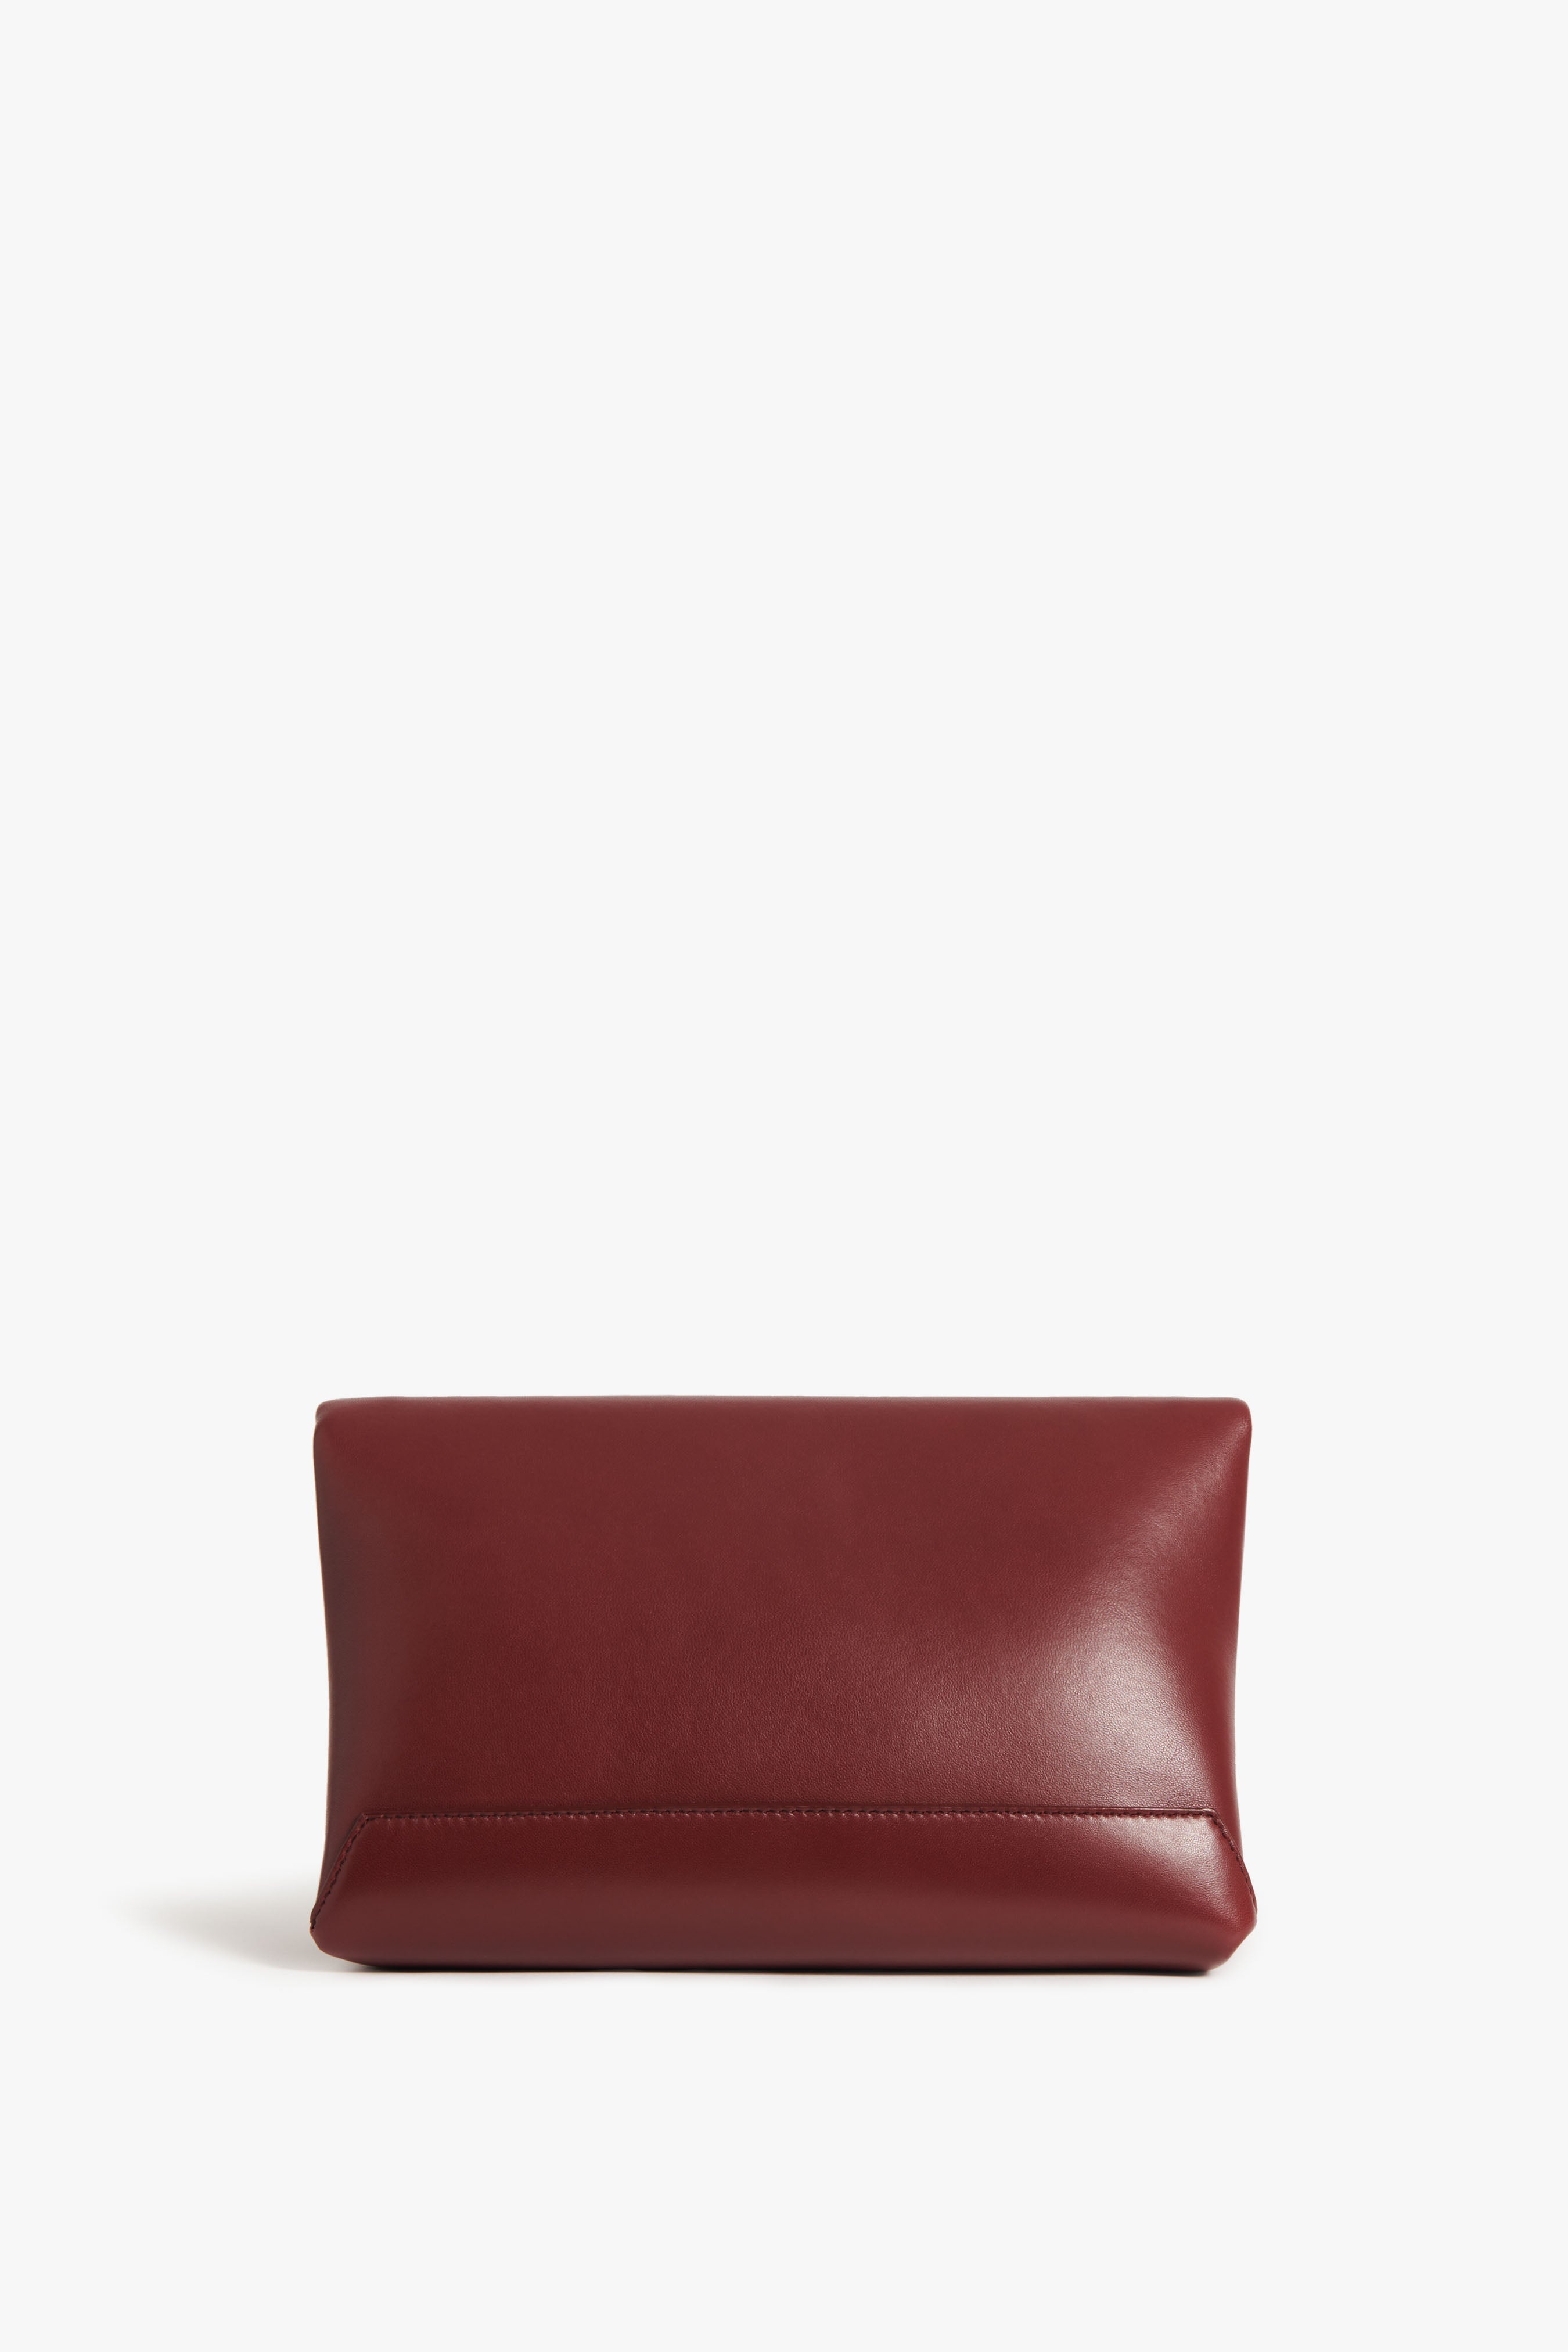 Chain Pouch In Burgundy Leather - 4